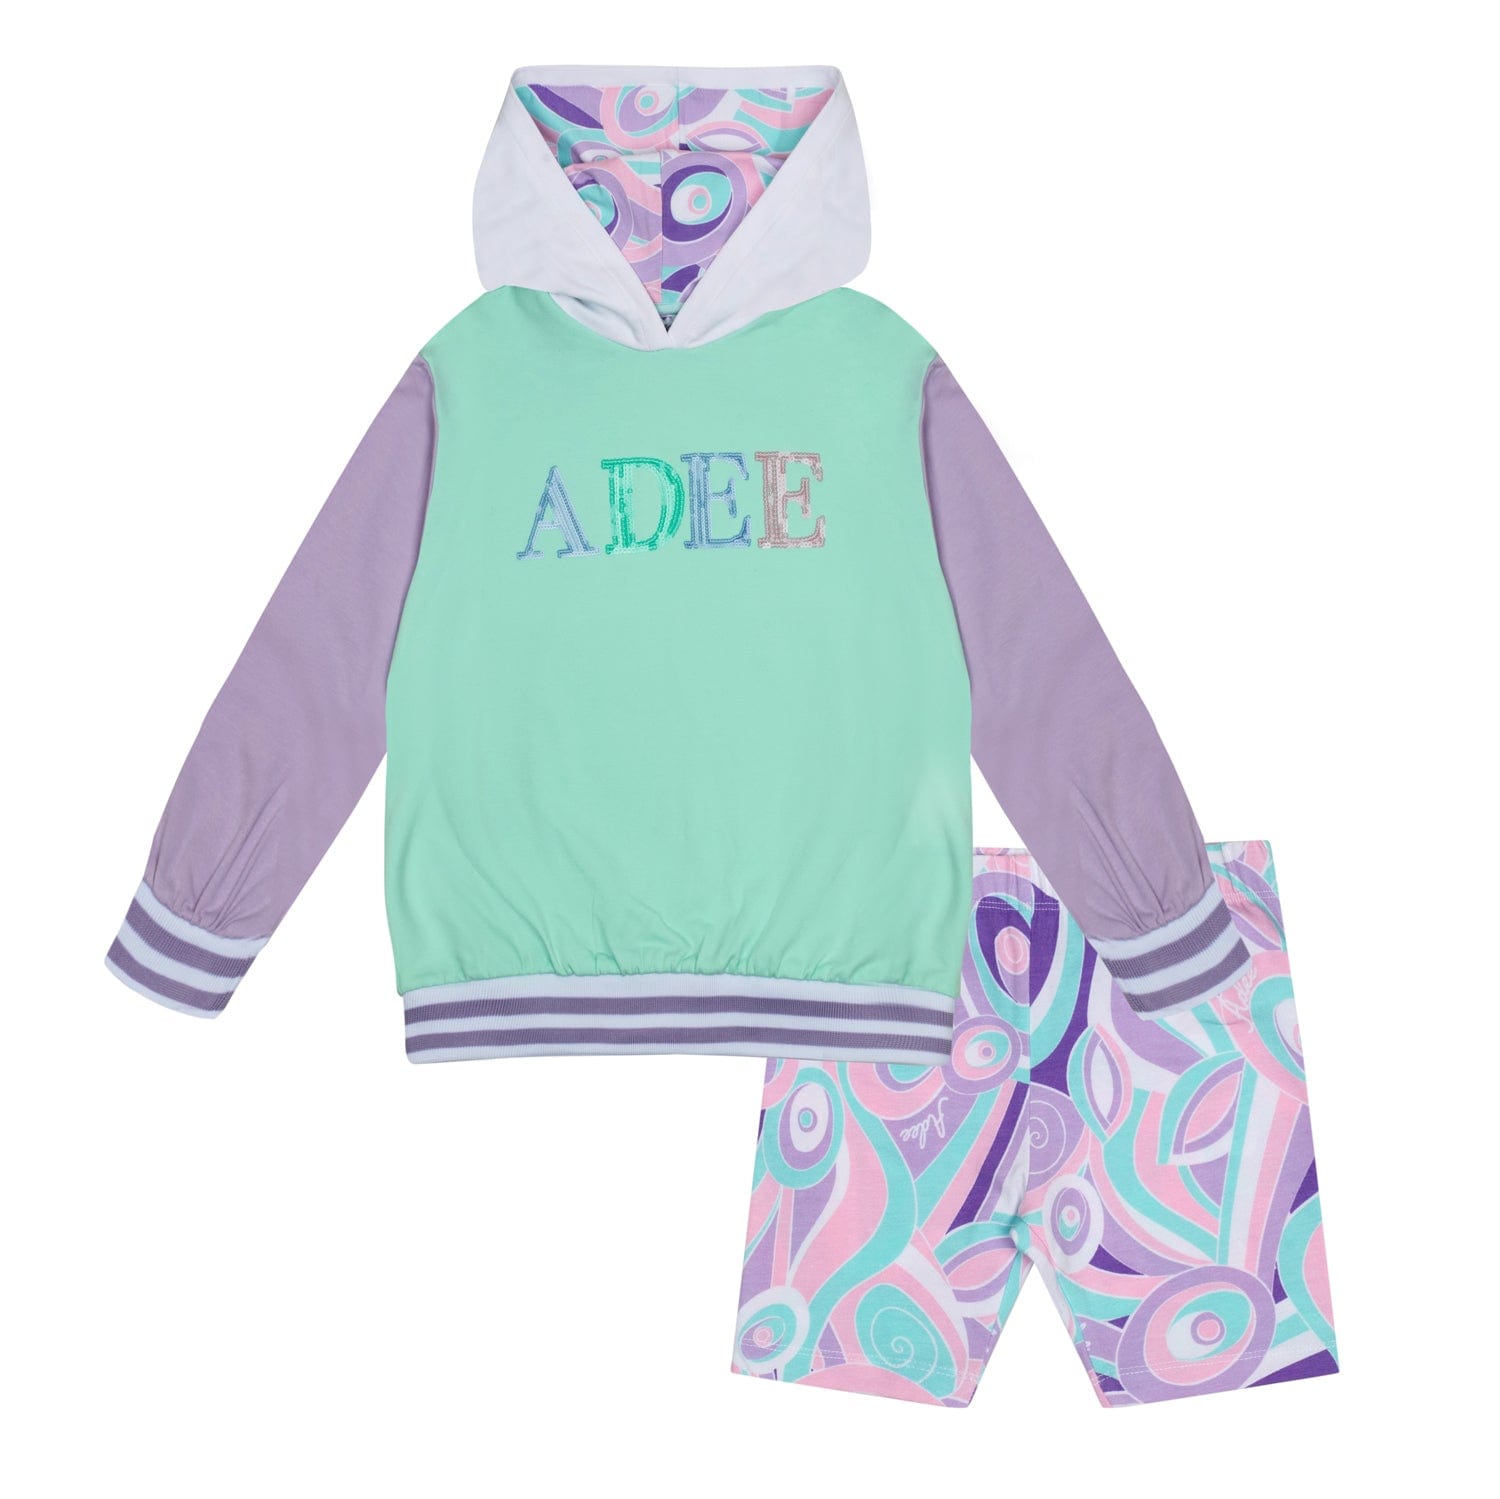 A DEE - Nellie Popping Pastels Hoody Cycle Set- Mint